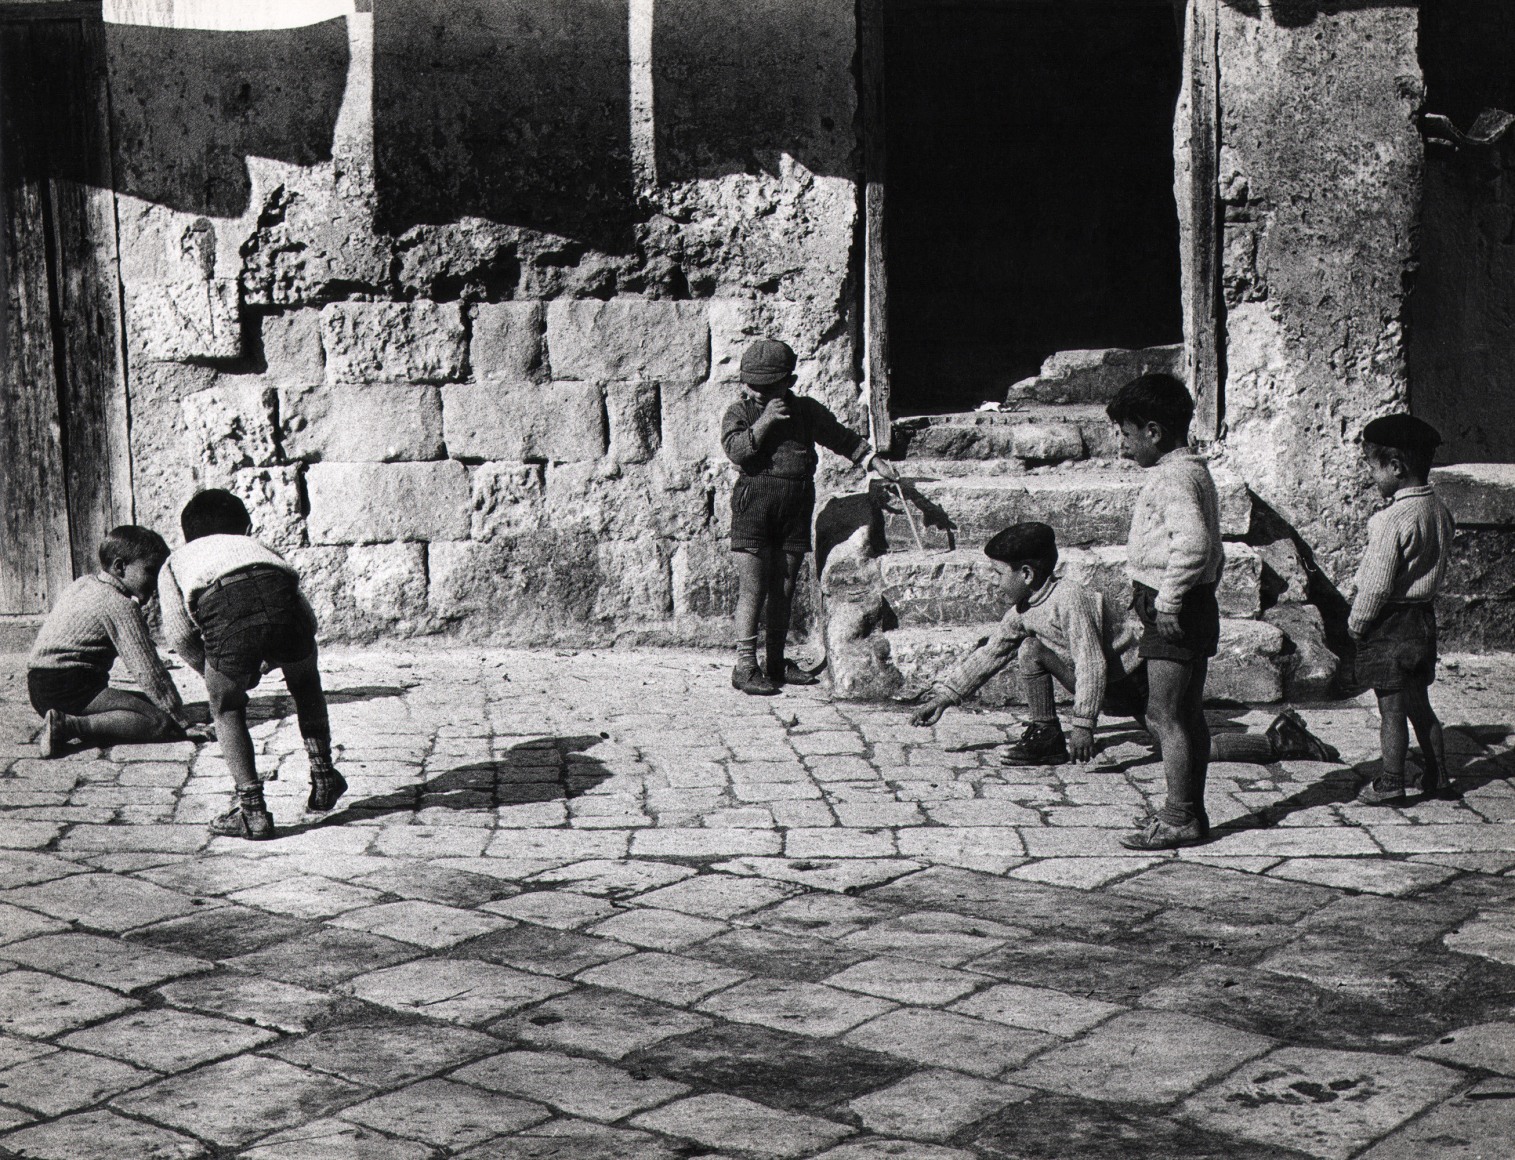 Giuseppe Bruno, Viaggio del Sud, Matera, ​1958. Six young boys play on the cobbled street in front of the doorway of a stone house. Three are standing; three crouch low to the ground.